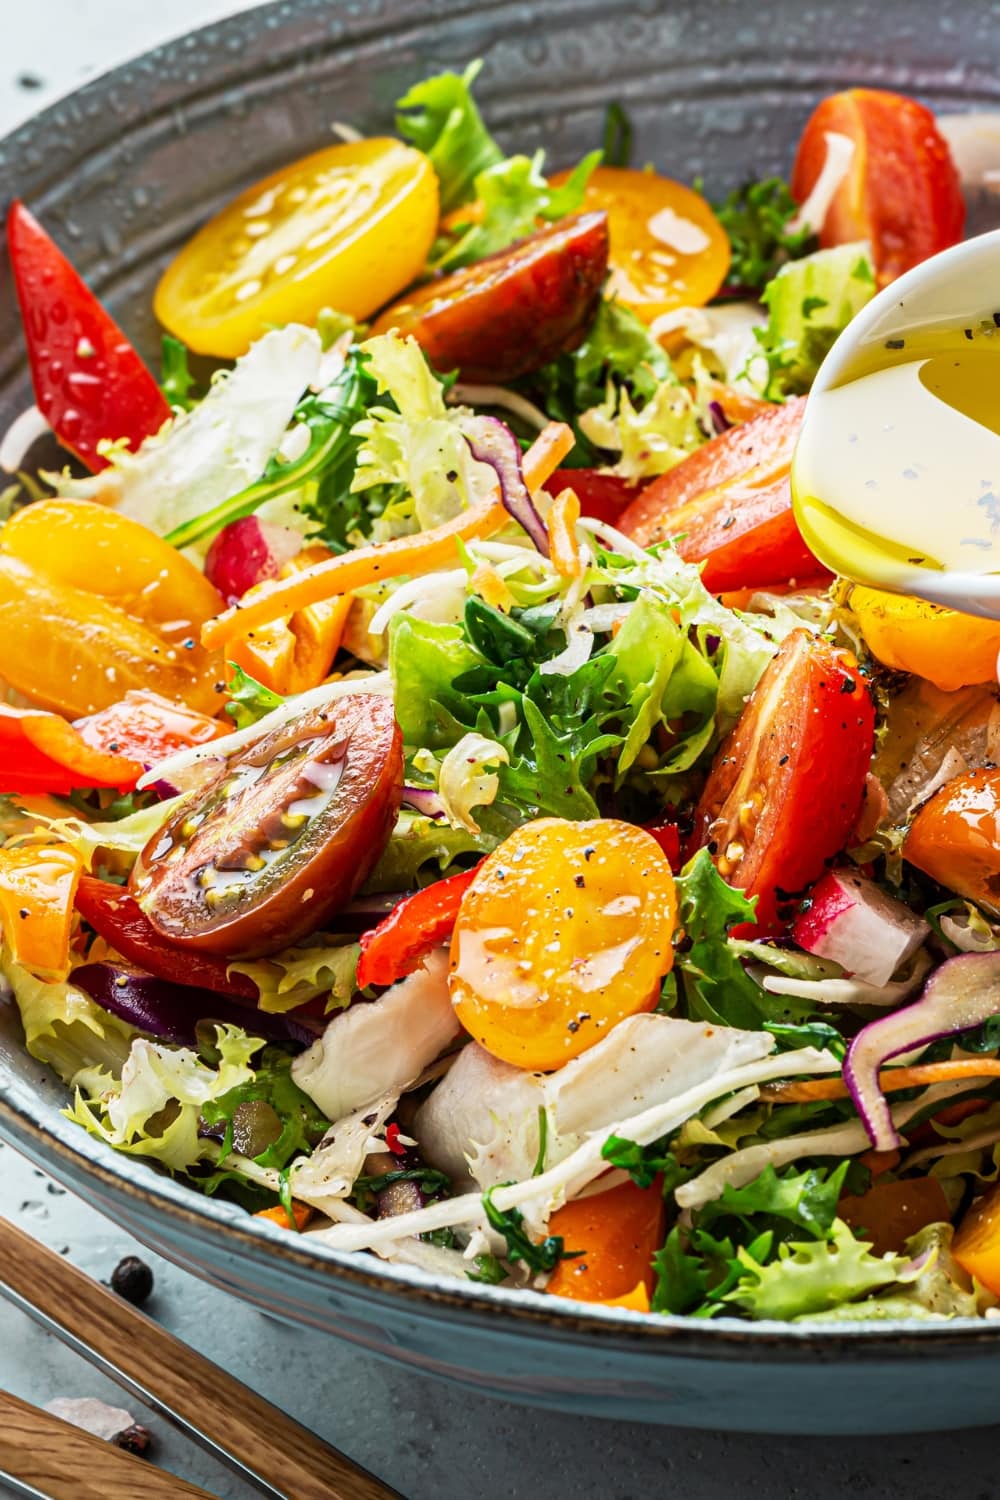 Homemade Vegetable Salad with Red and Yellow Cherry Tomatoes and Olive Oil